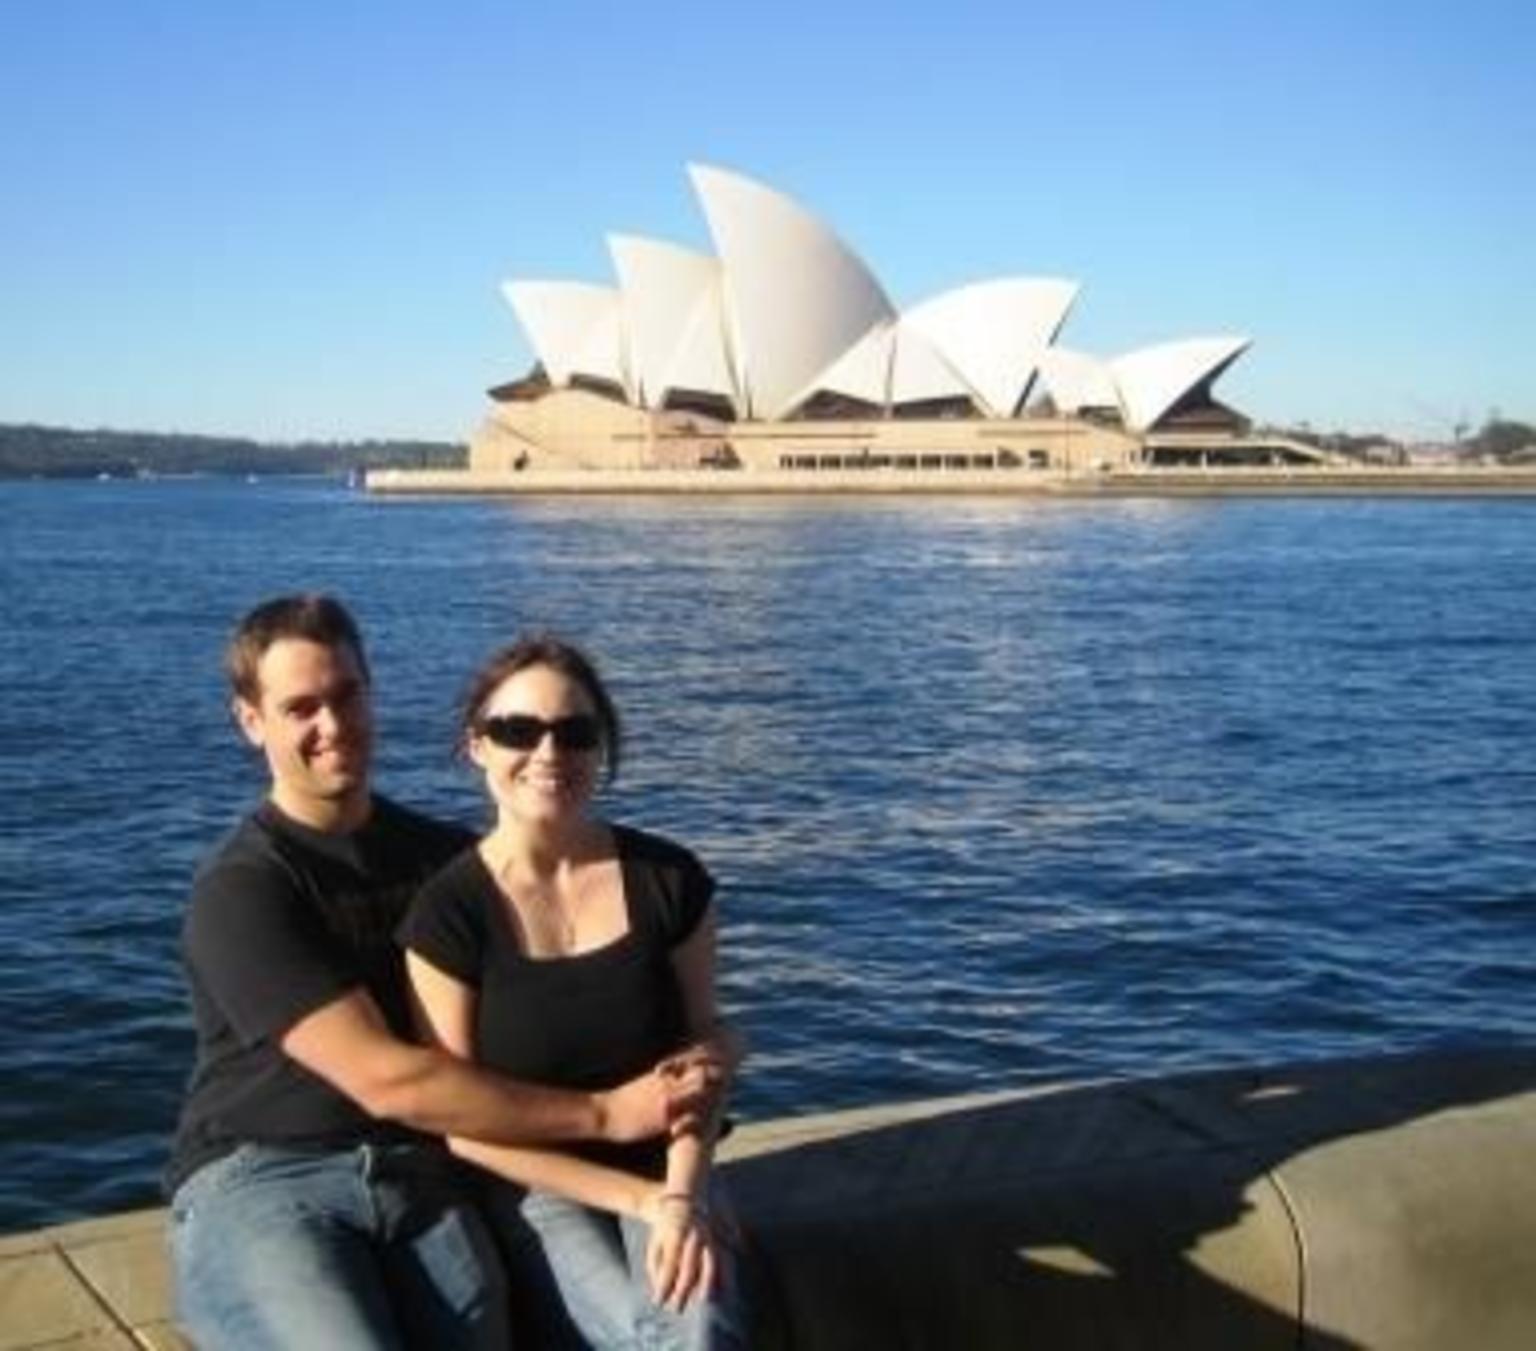 A photo opportunity on our Sydney walking tour!